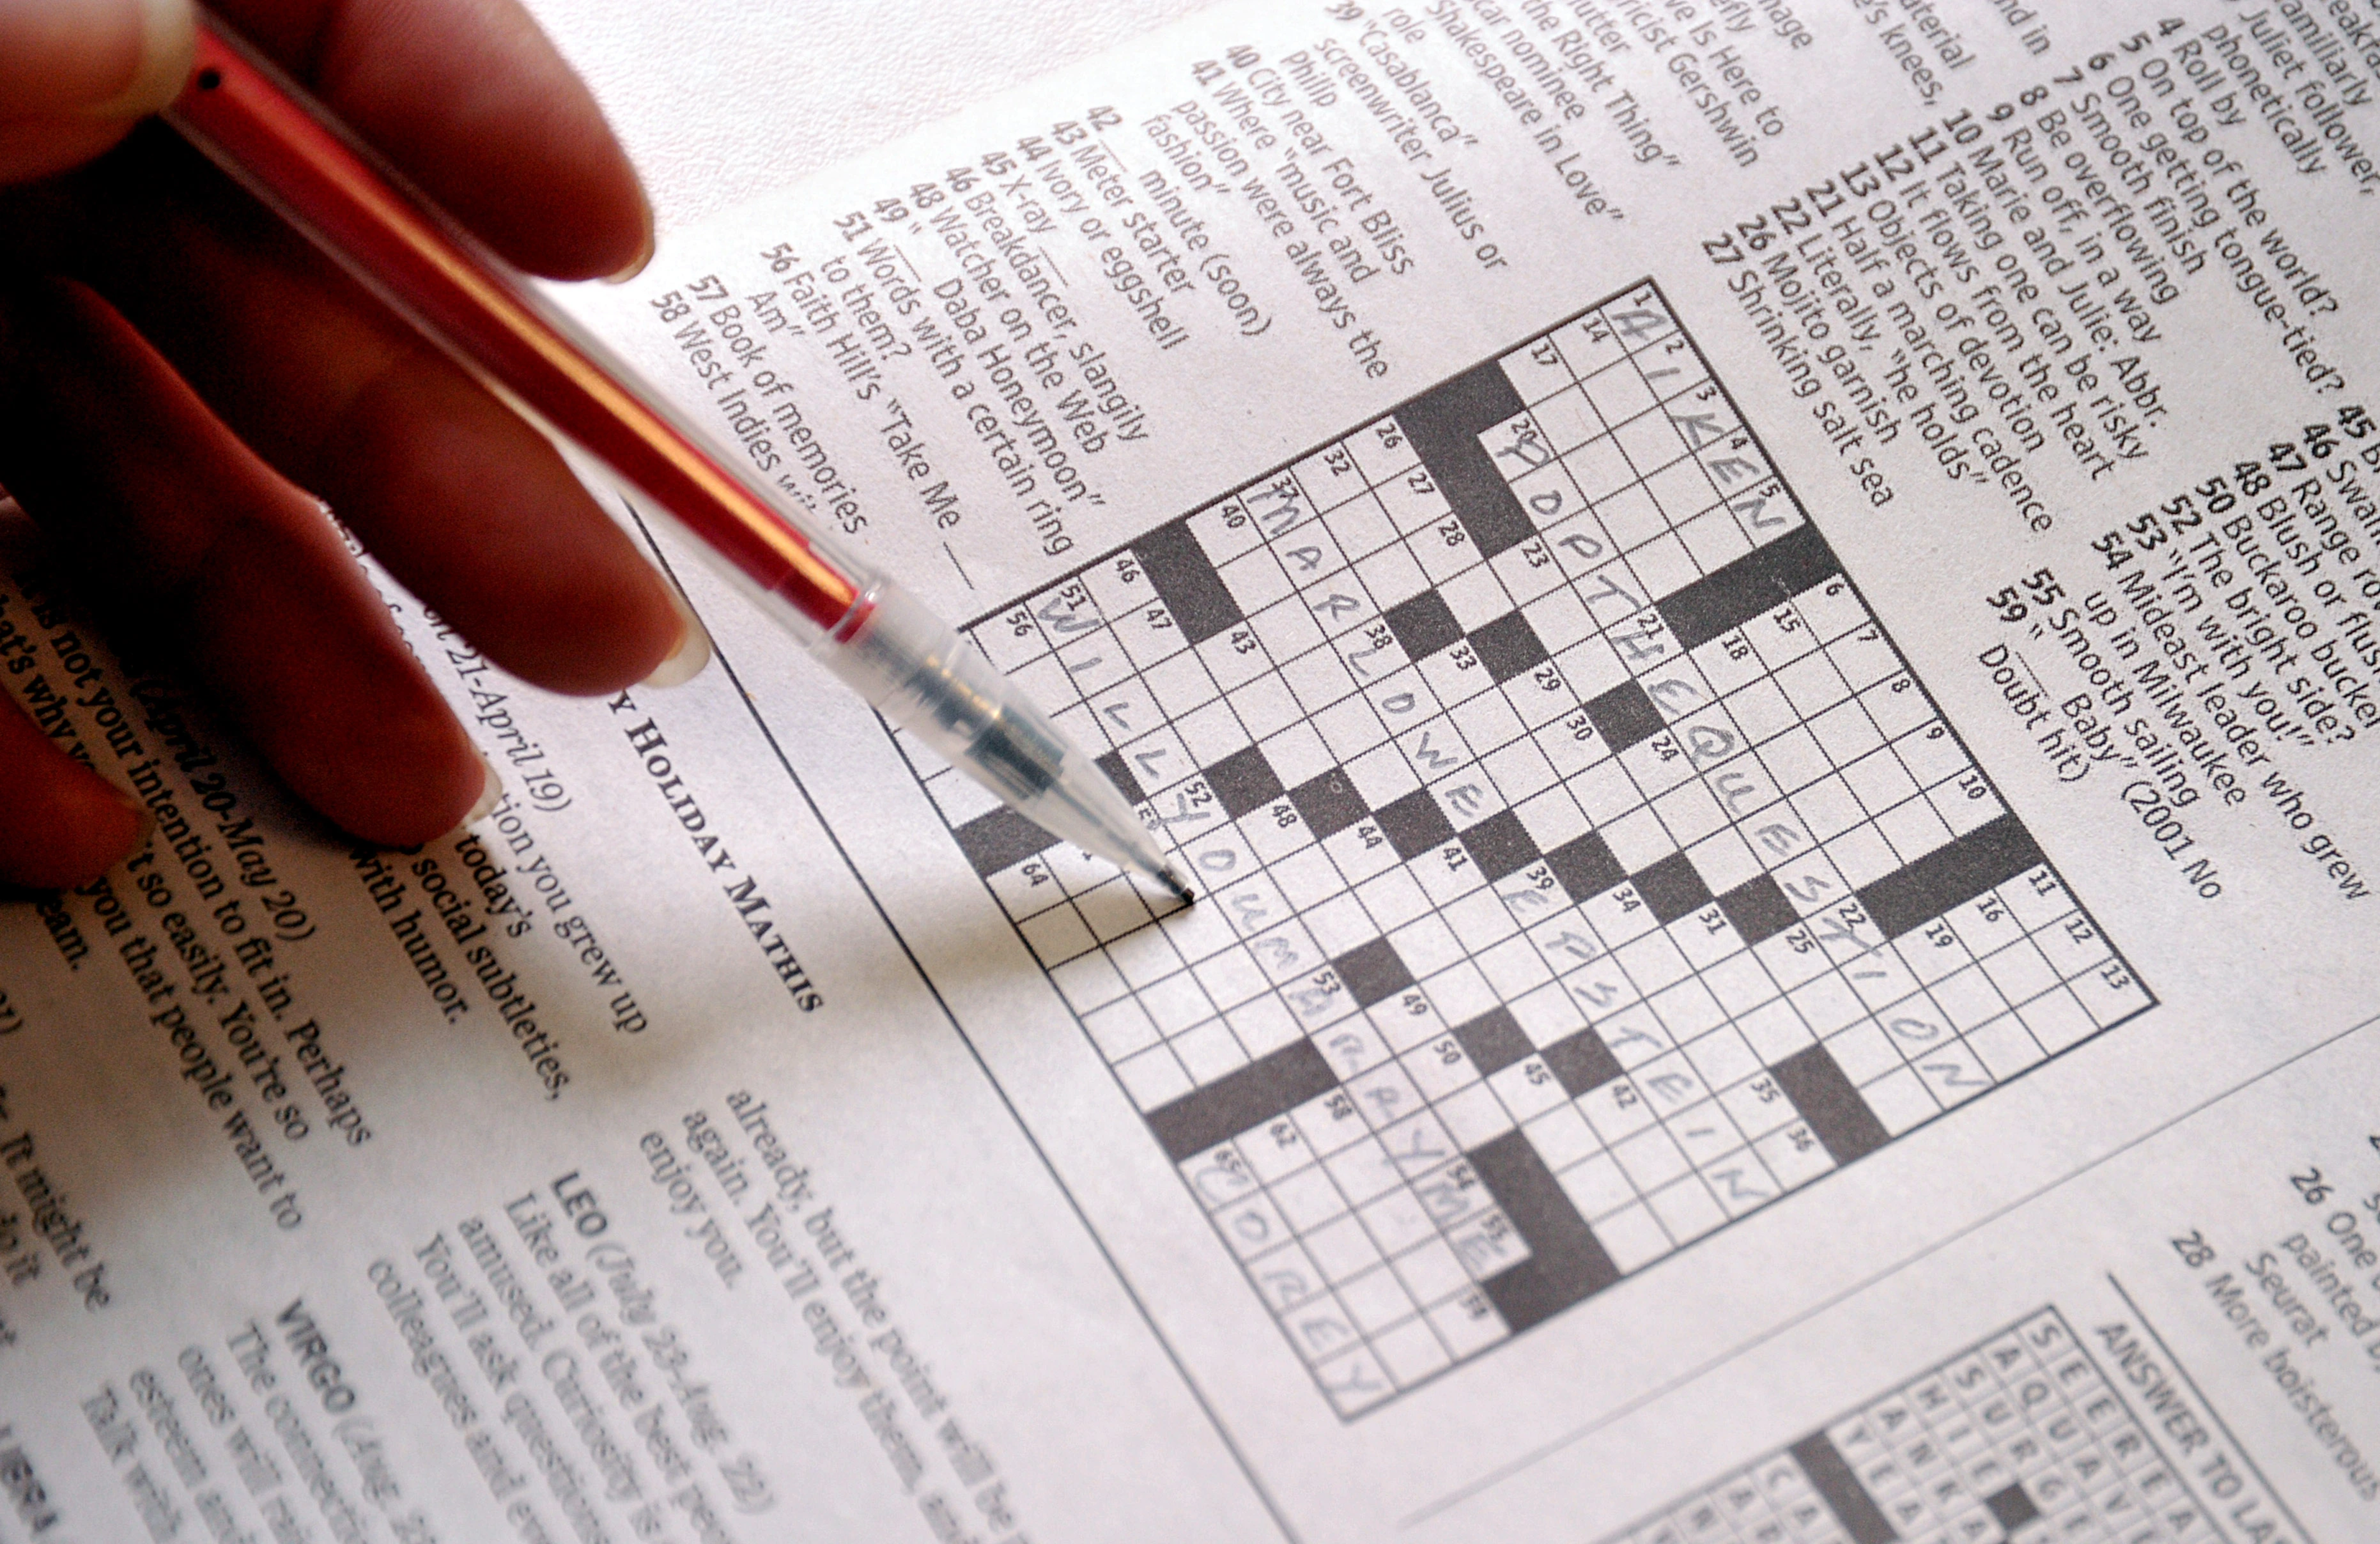 Stay sharp with crossword puzzles. | Photo from AFP via Getty Images